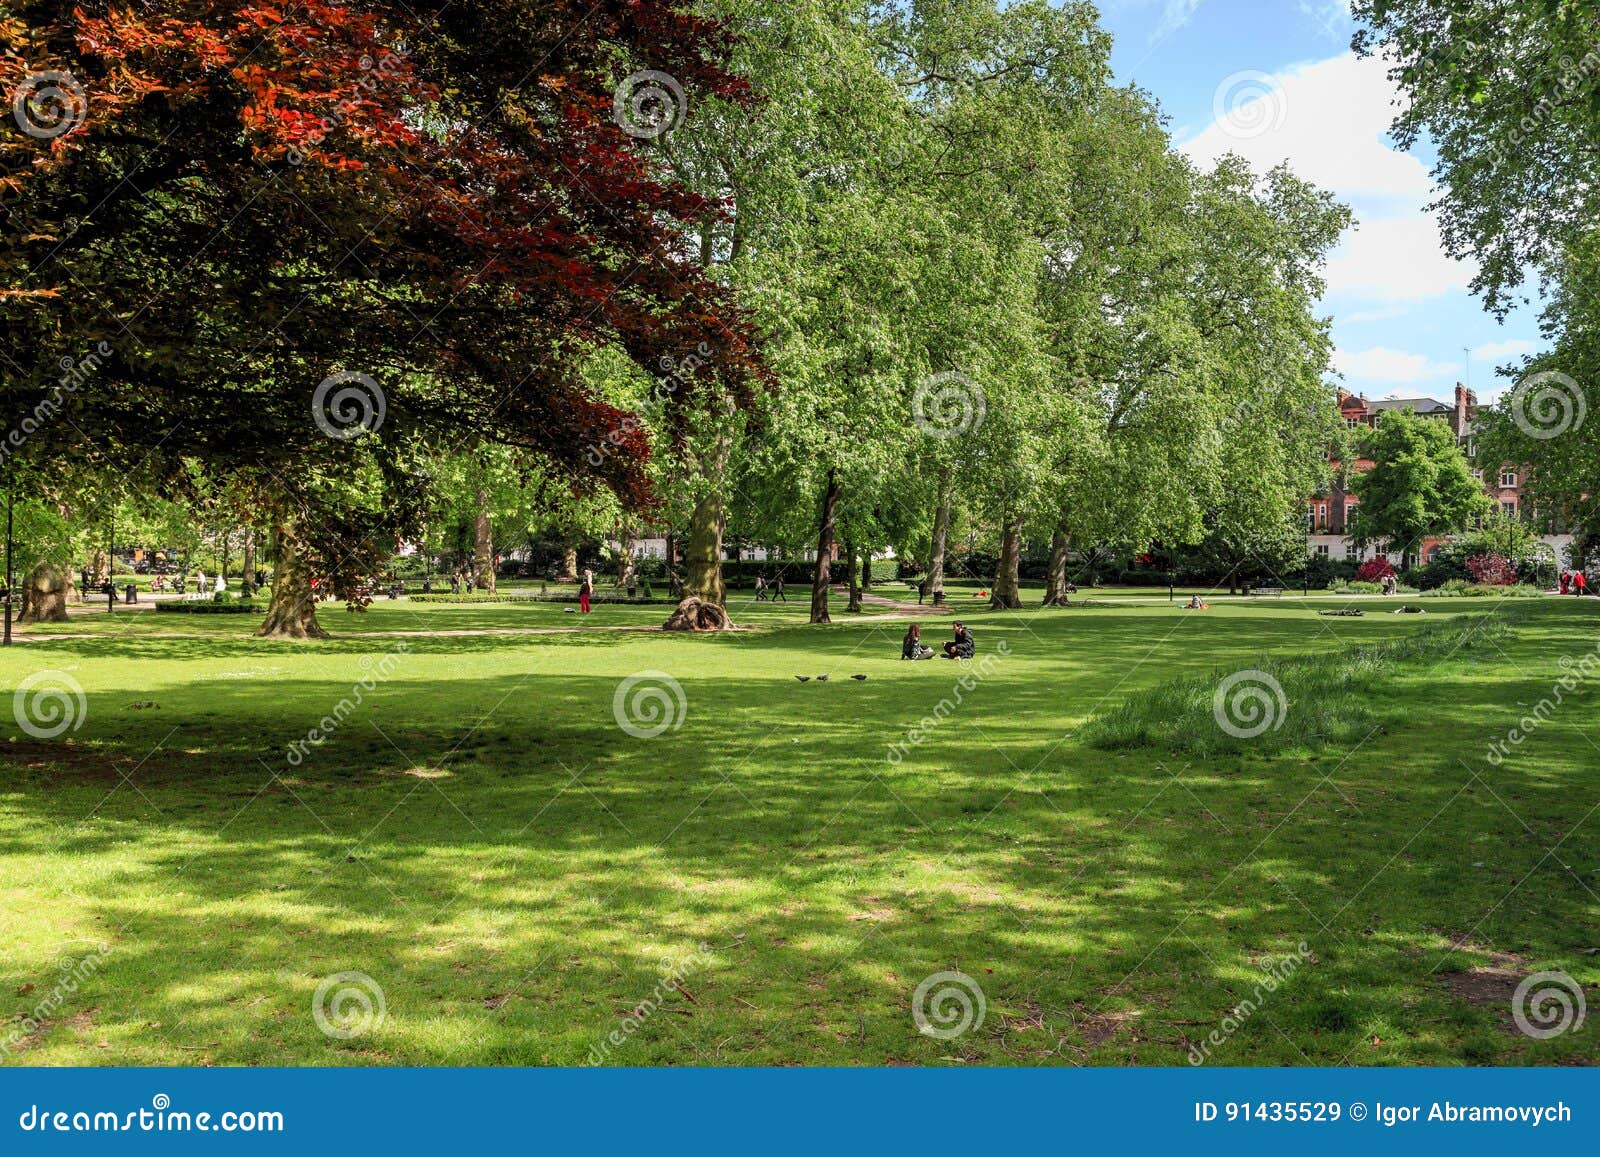 Russell square, London editorial stock image. Image of britain - 91435529